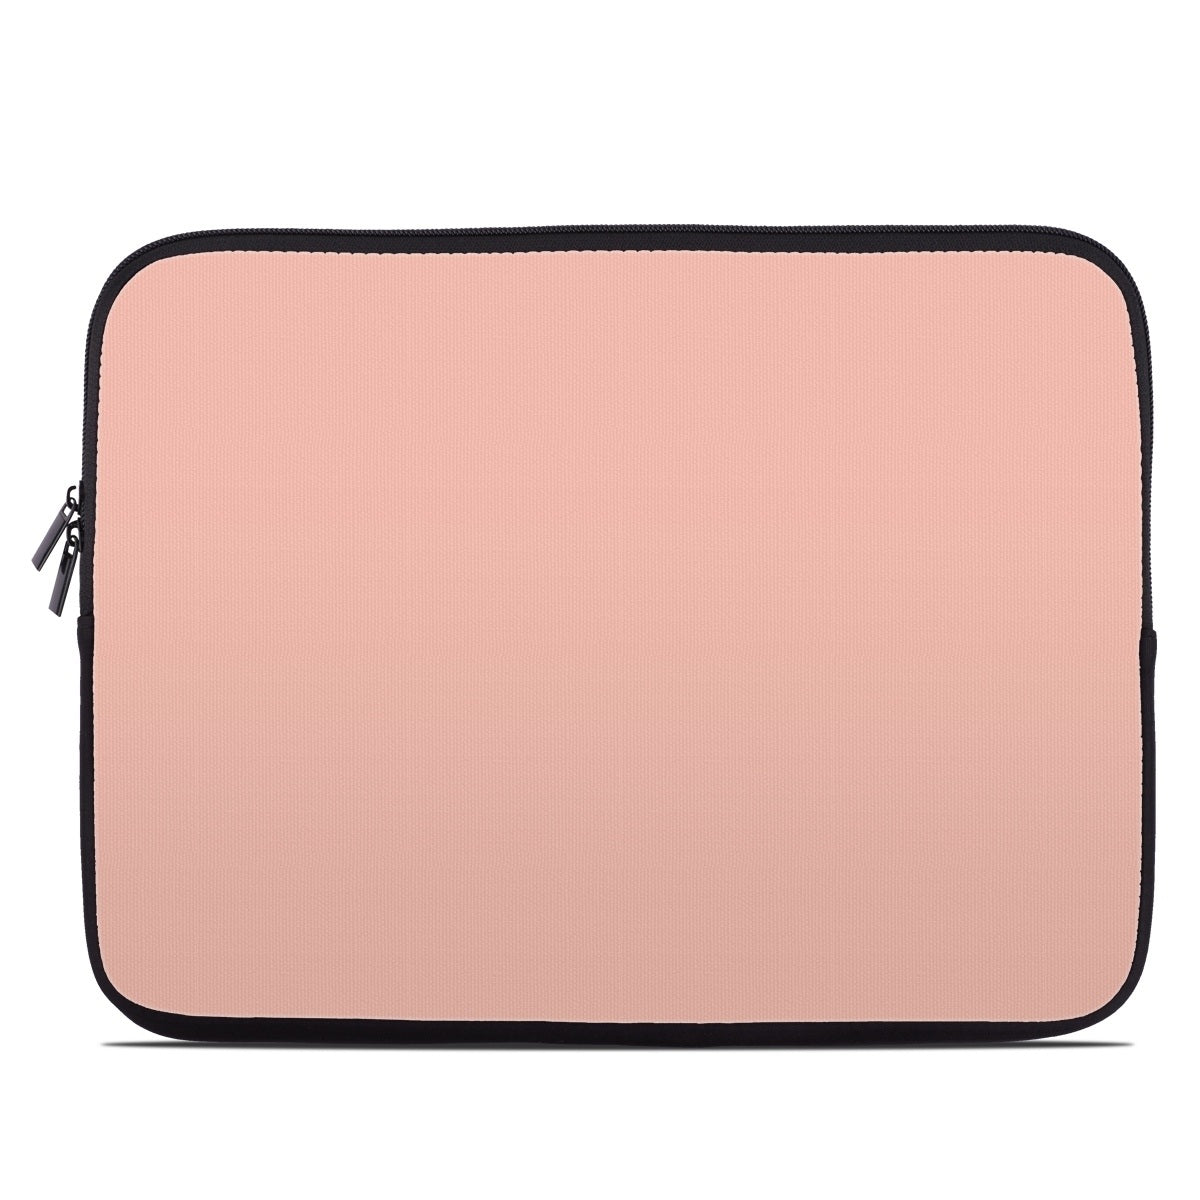 Solid State Peach - Laptop Sleeve